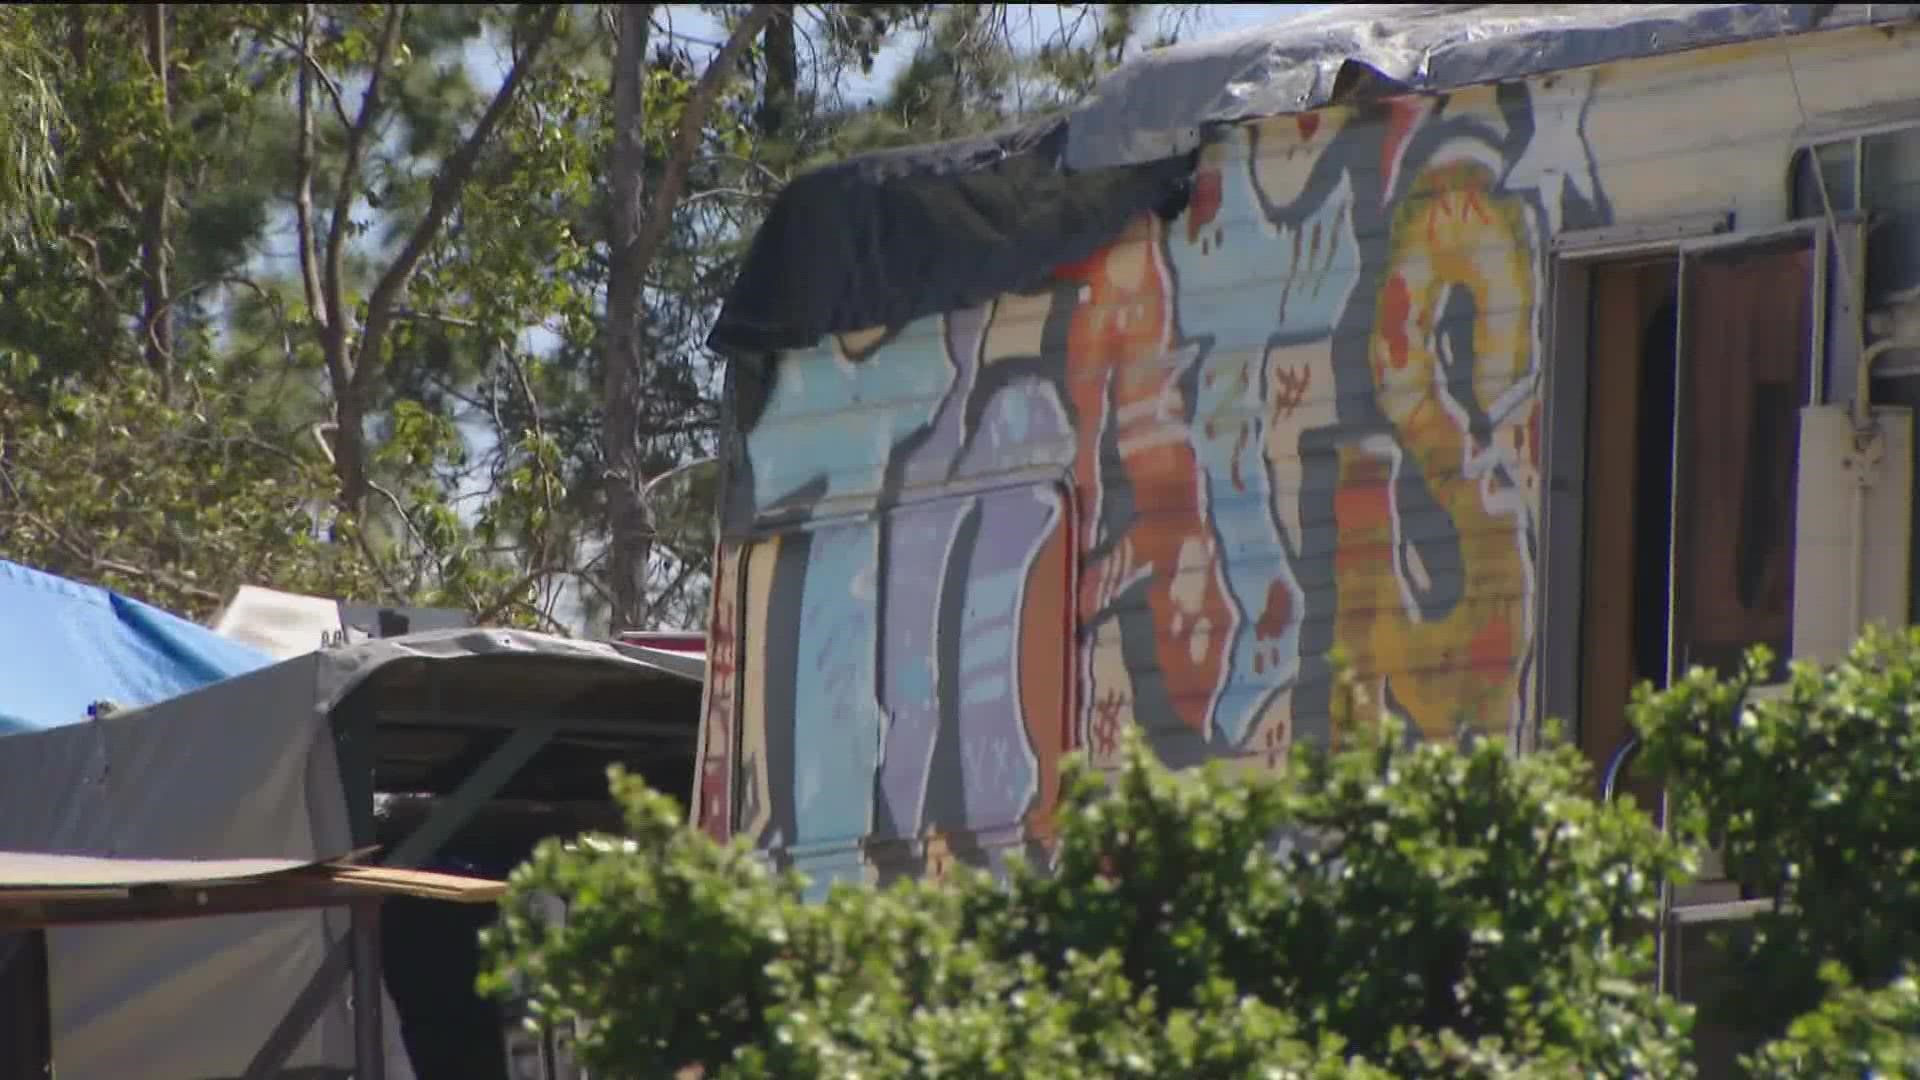 The city has filed lawsuit alleging Escondido property is a public nuisance.